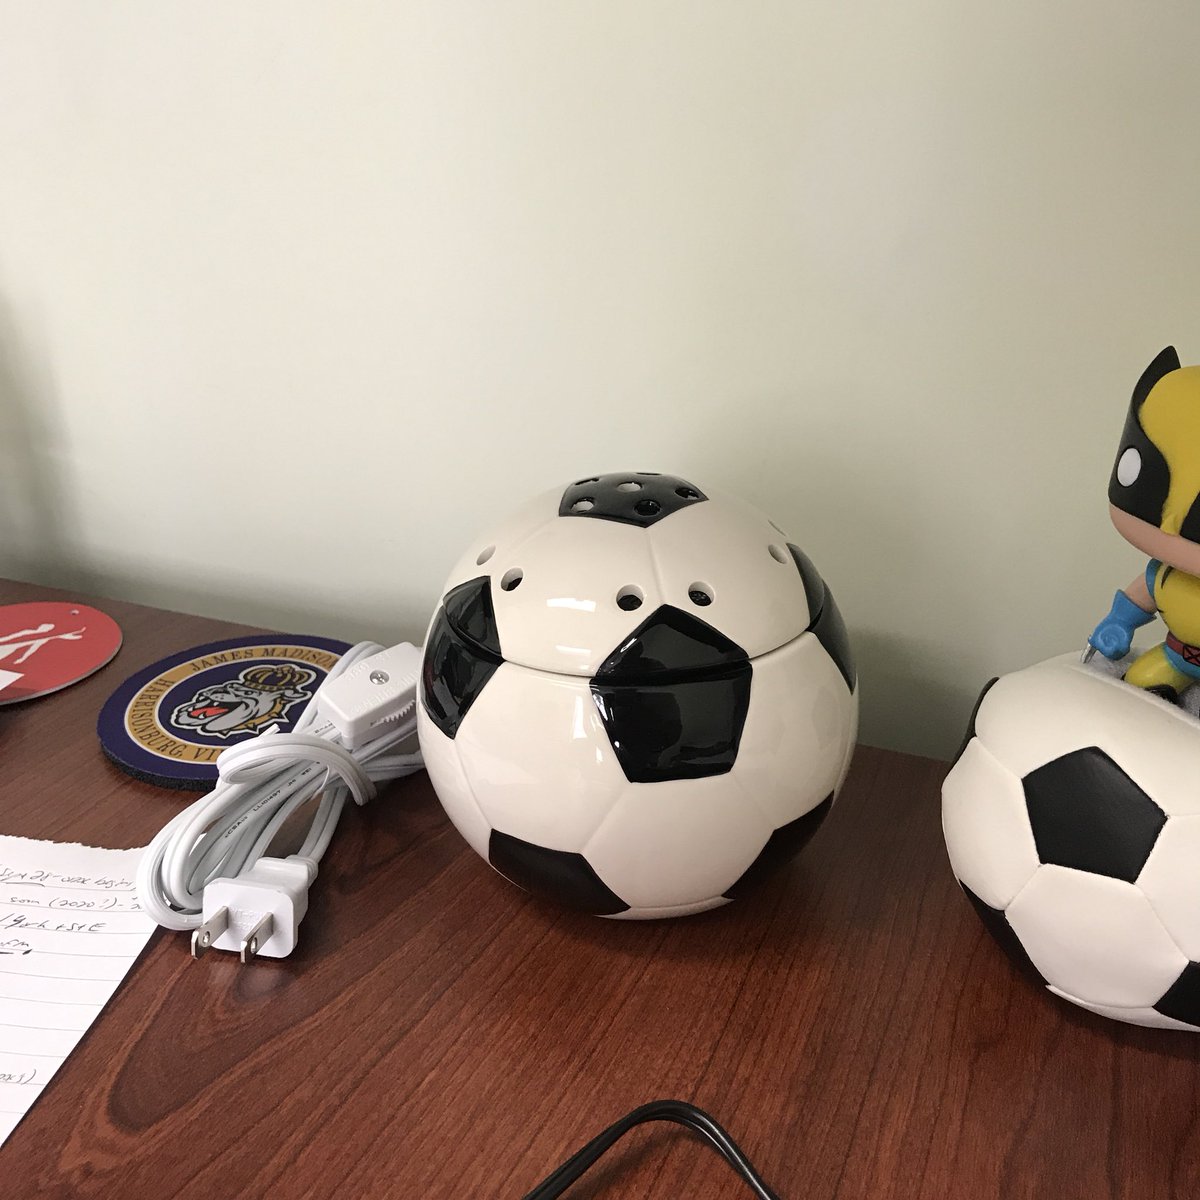 First gift. Still unsure whether it was to make my office smell fancy or strictly kindness. Probably 60/40. Thanks 2-1! 😉🦊 #Grateful #FreeSmells #SweetSoccer